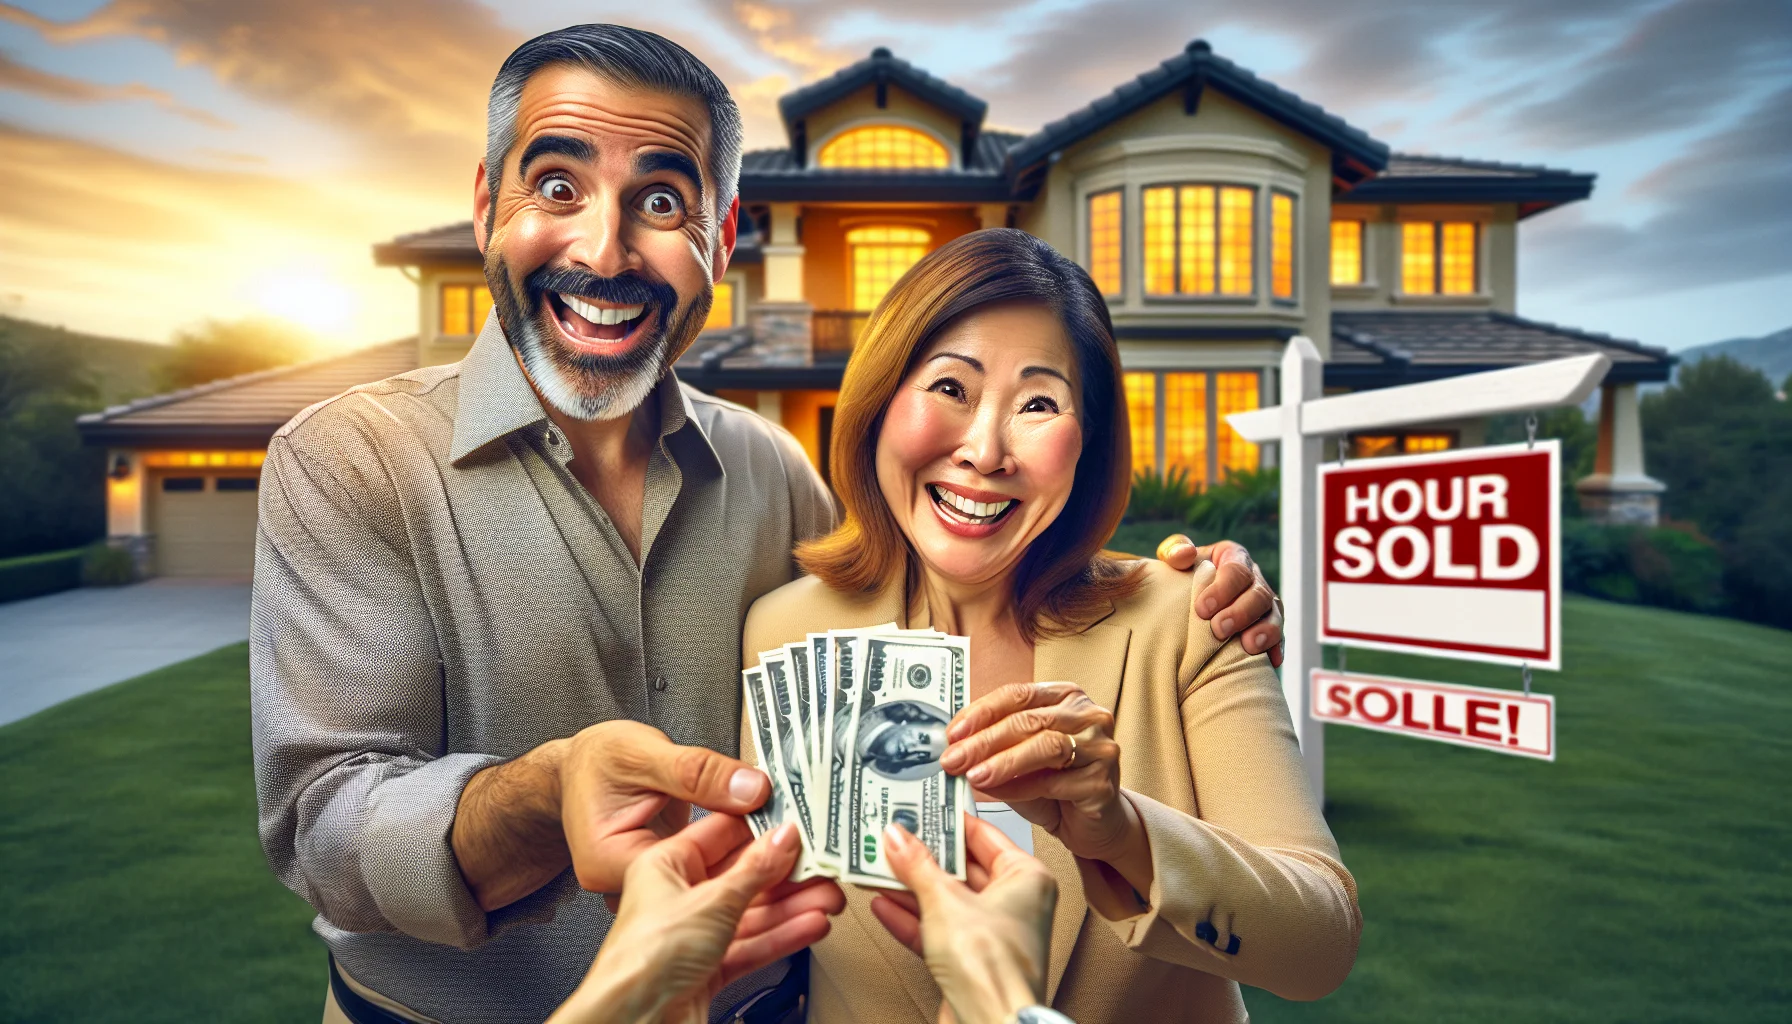 Imagine a humorous yet lifelike picture that perfectly encapsulates the initial down payment for a first-time homeowner in the best possible scenario concerning real estate. This could perhaps portray a middle-aged, mixed-race couple (the man of Hispanic descent and the woman of East Asian descent) with beaming smiles as they confidently hand over a tiny pile of money to the Caucasian female real estate agent. Meanwhile, the luxury house in the background radiates a warm and welcoming glow, and a 'SOLD' sign stands triumphantly on the exquisitely manicured lawn.